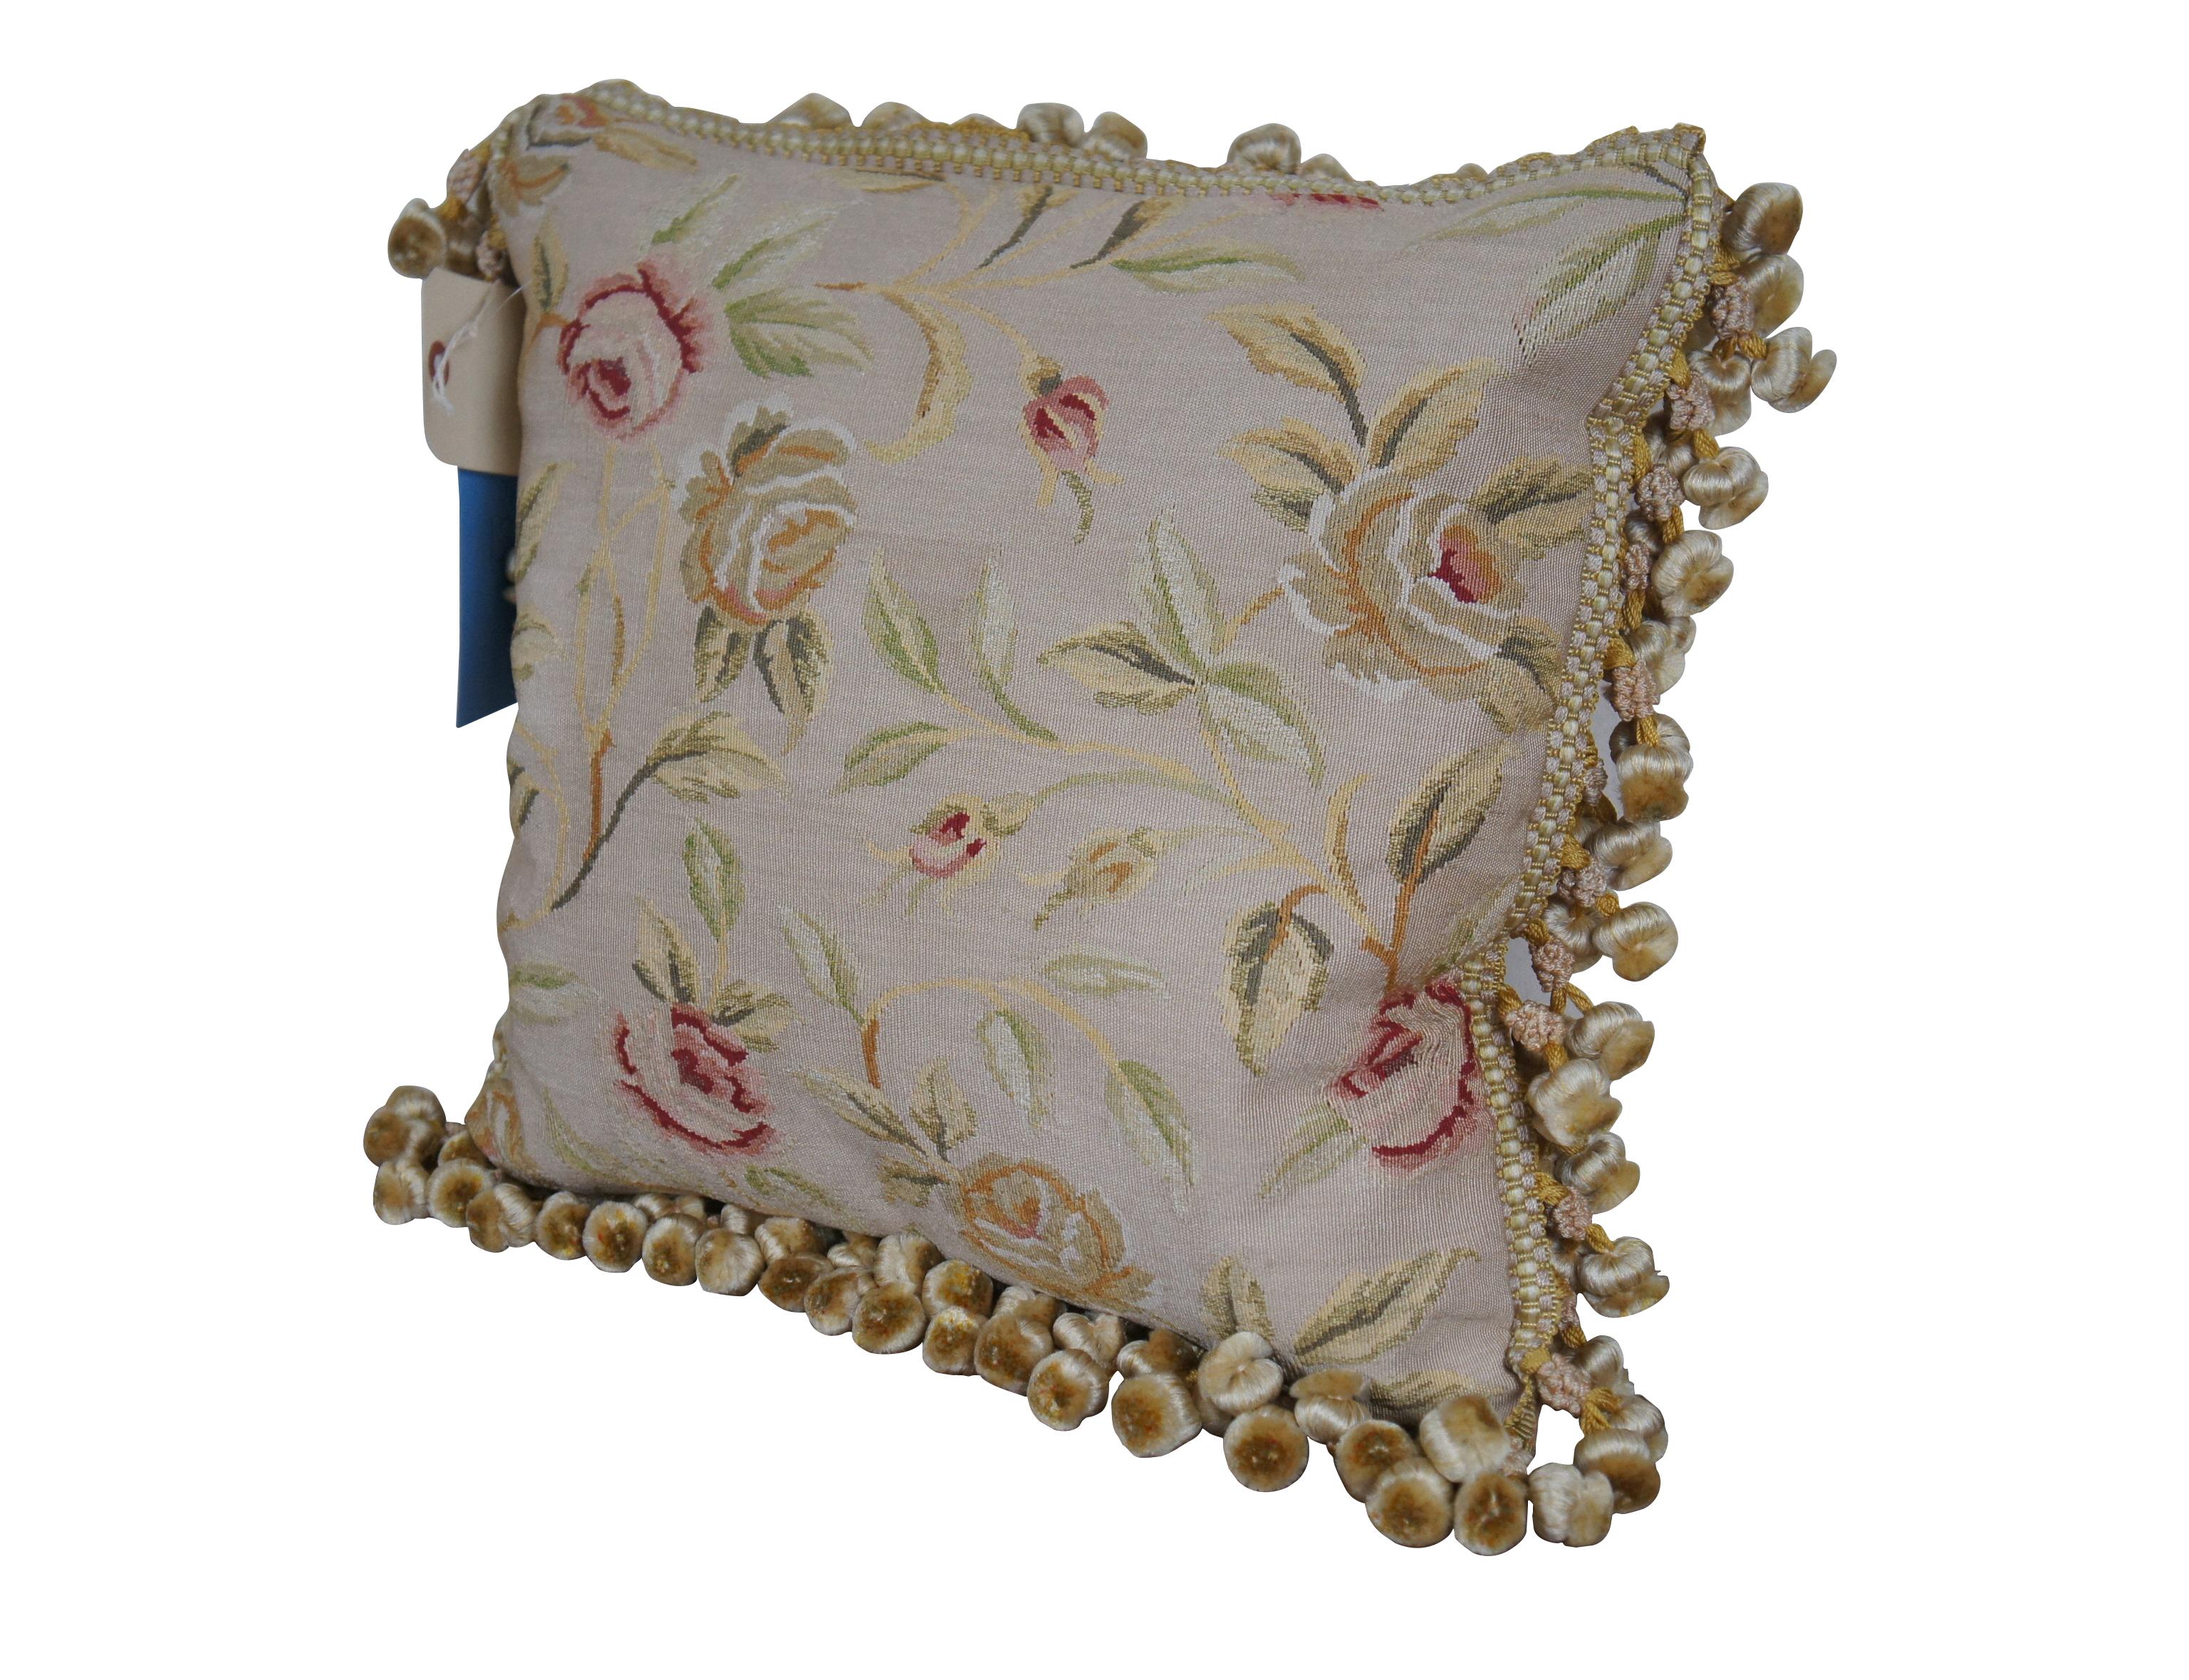 20th century square throw pillow, embroidered in silk with leafy stems of large yellow and pink roses. Cream and gold ball tassel trim. Light brown velour back with zipper closure.

Dimensions:
16